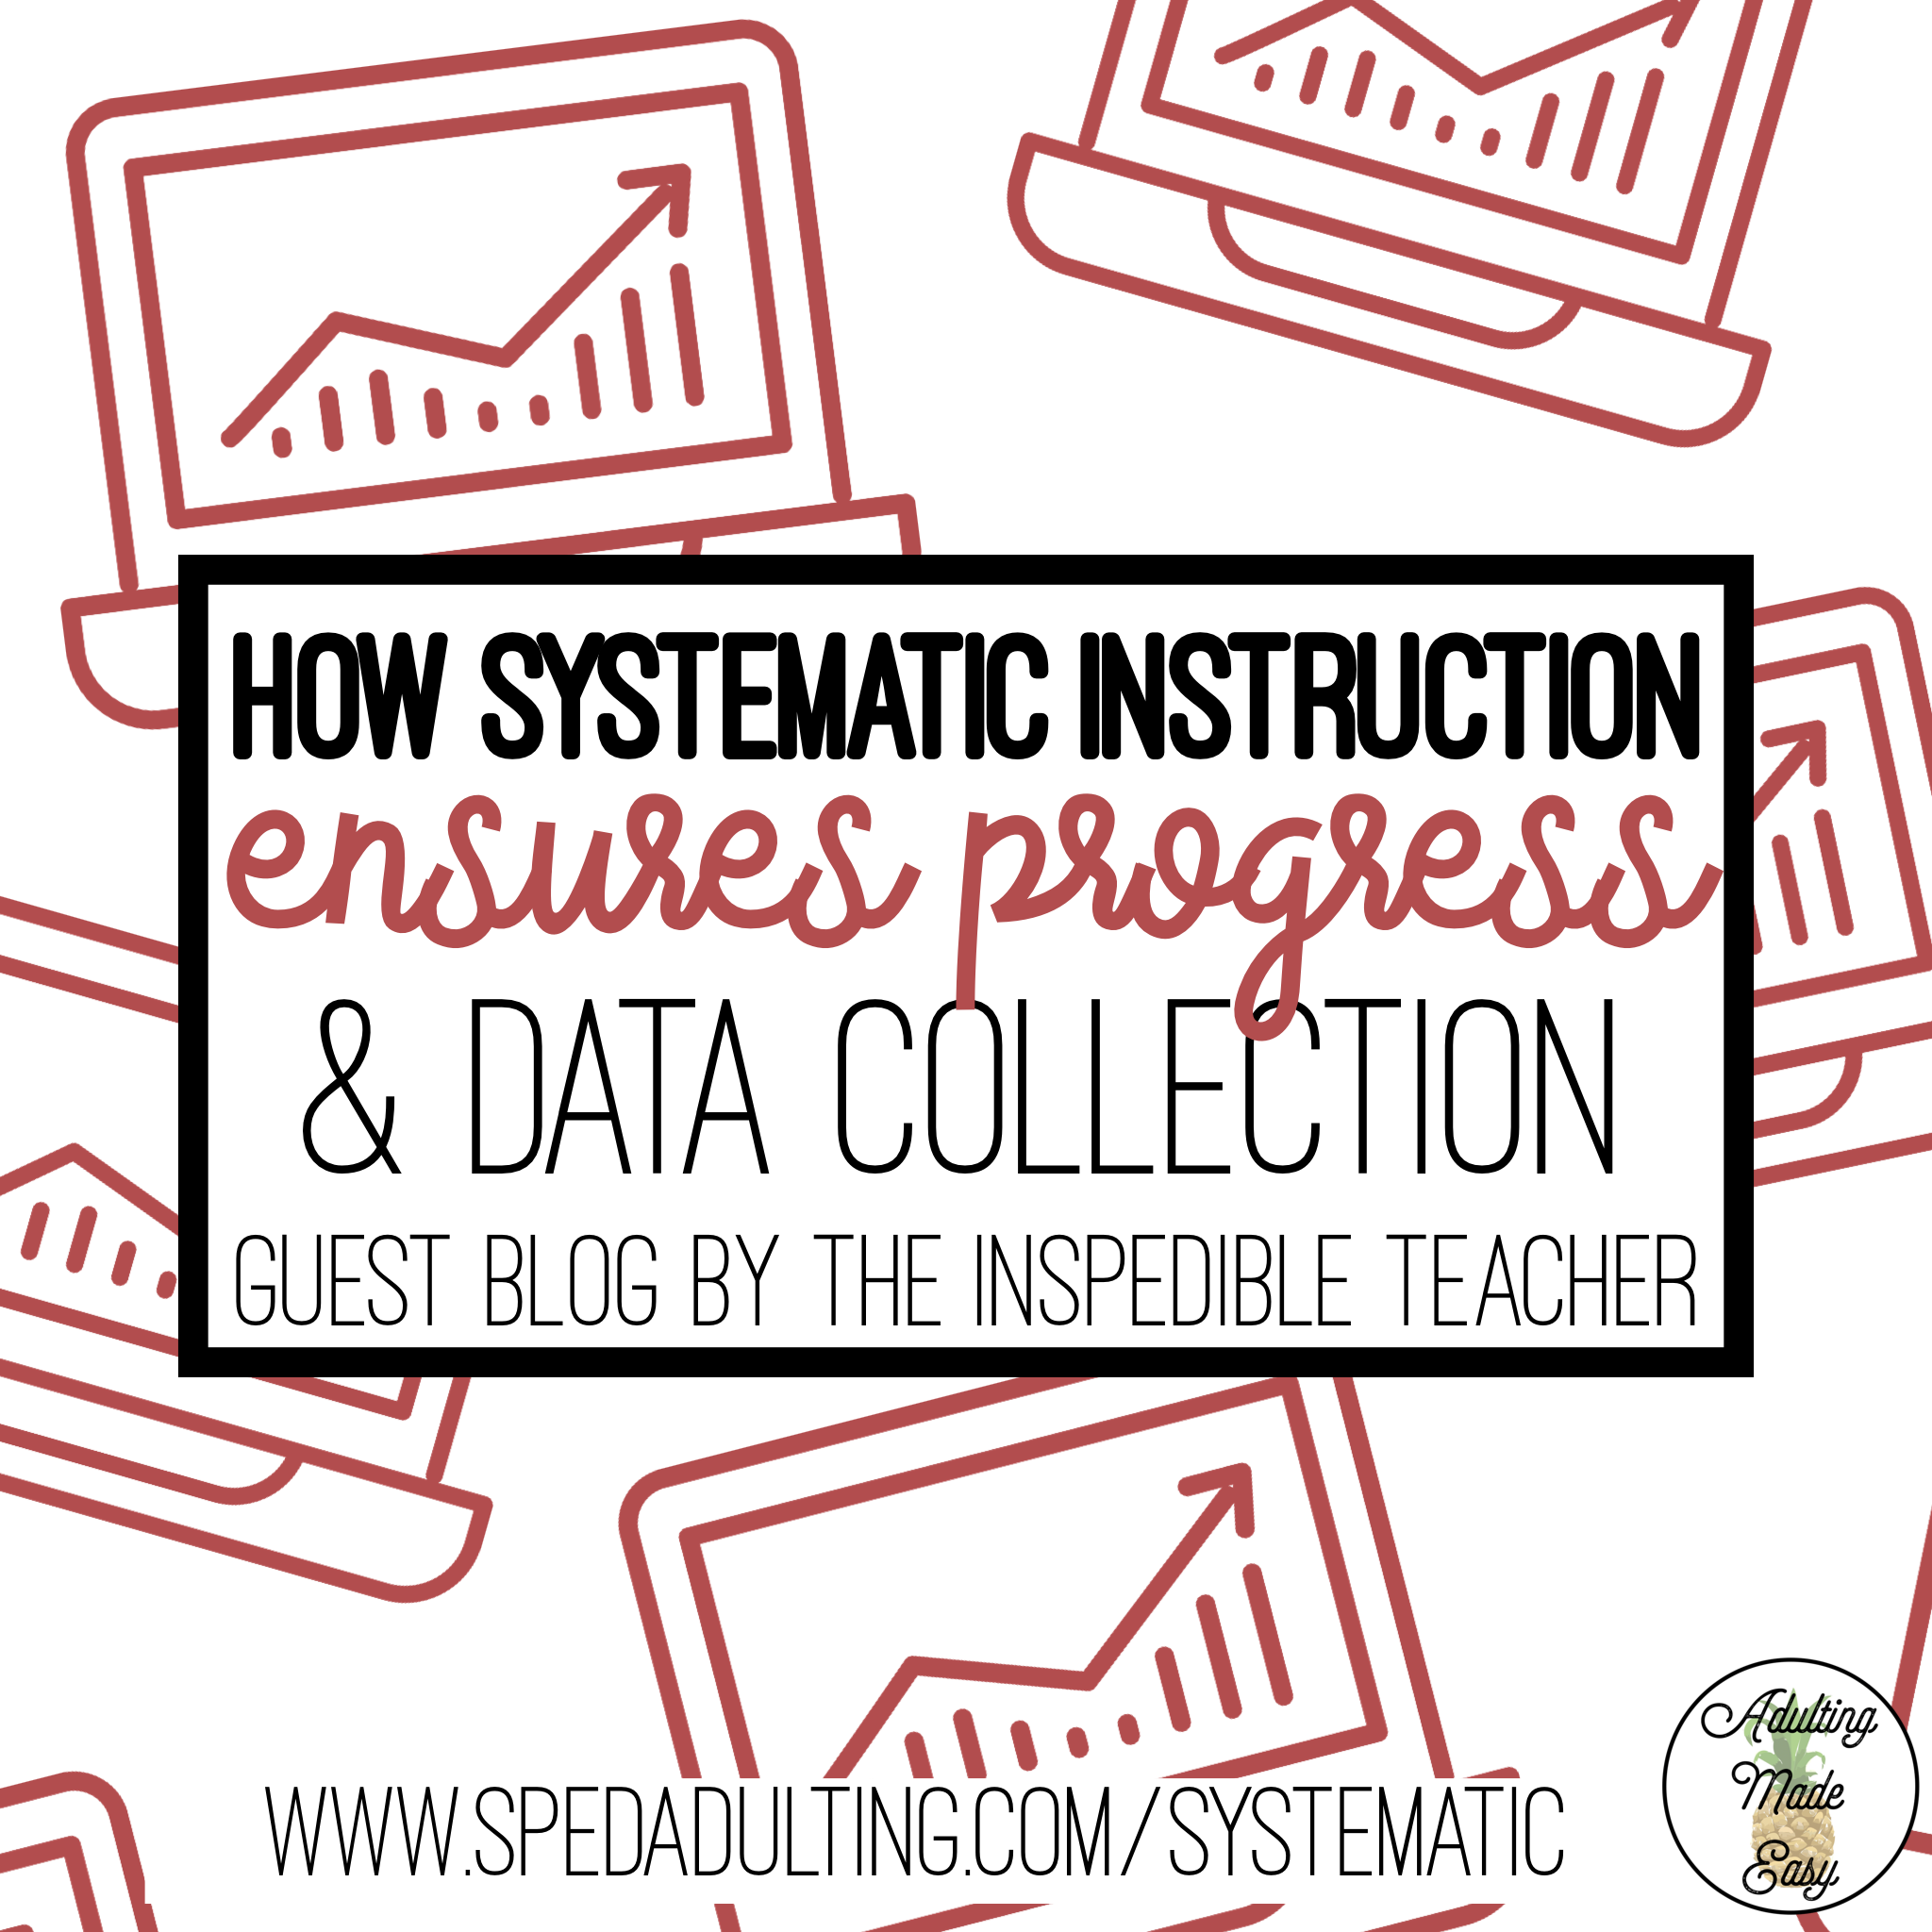 How systematic instruction ensures progress & data collection